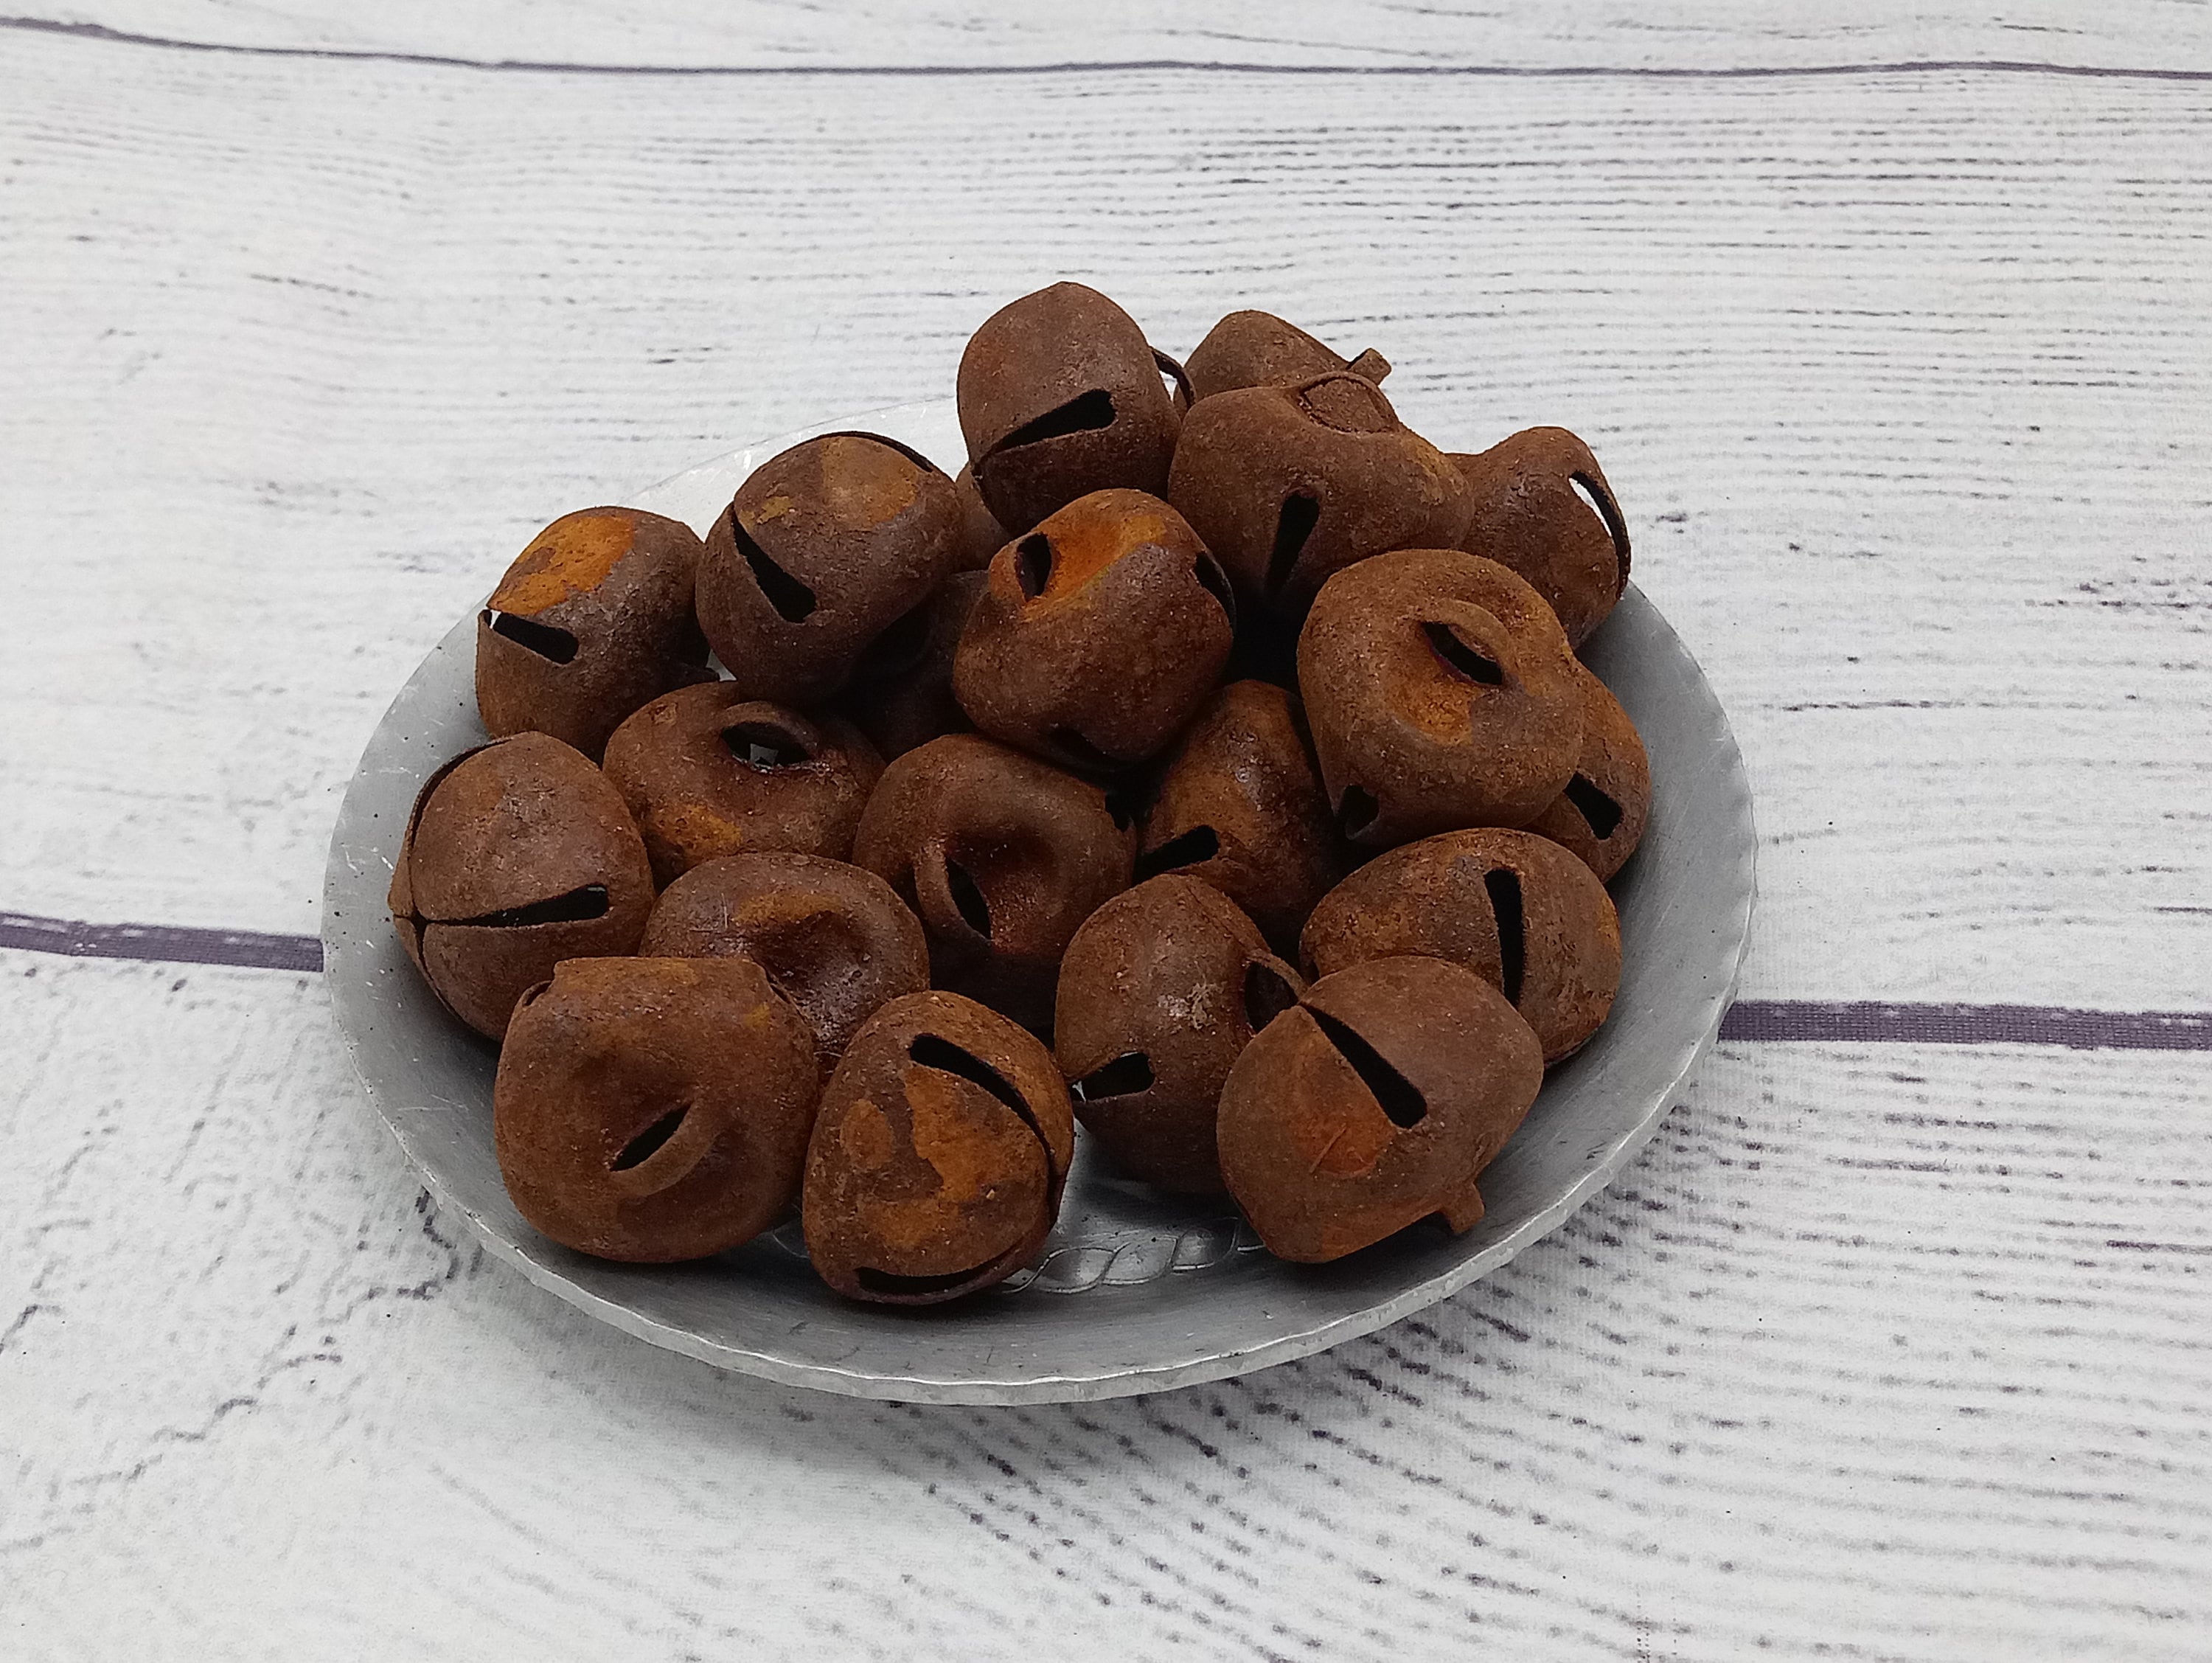 20 pc Country Primitive Rusty Acorn Jingle Bells Rustic Farmhouse Home  Decor for Christmas Crafting Autumn (Rusty Acorn Bells)